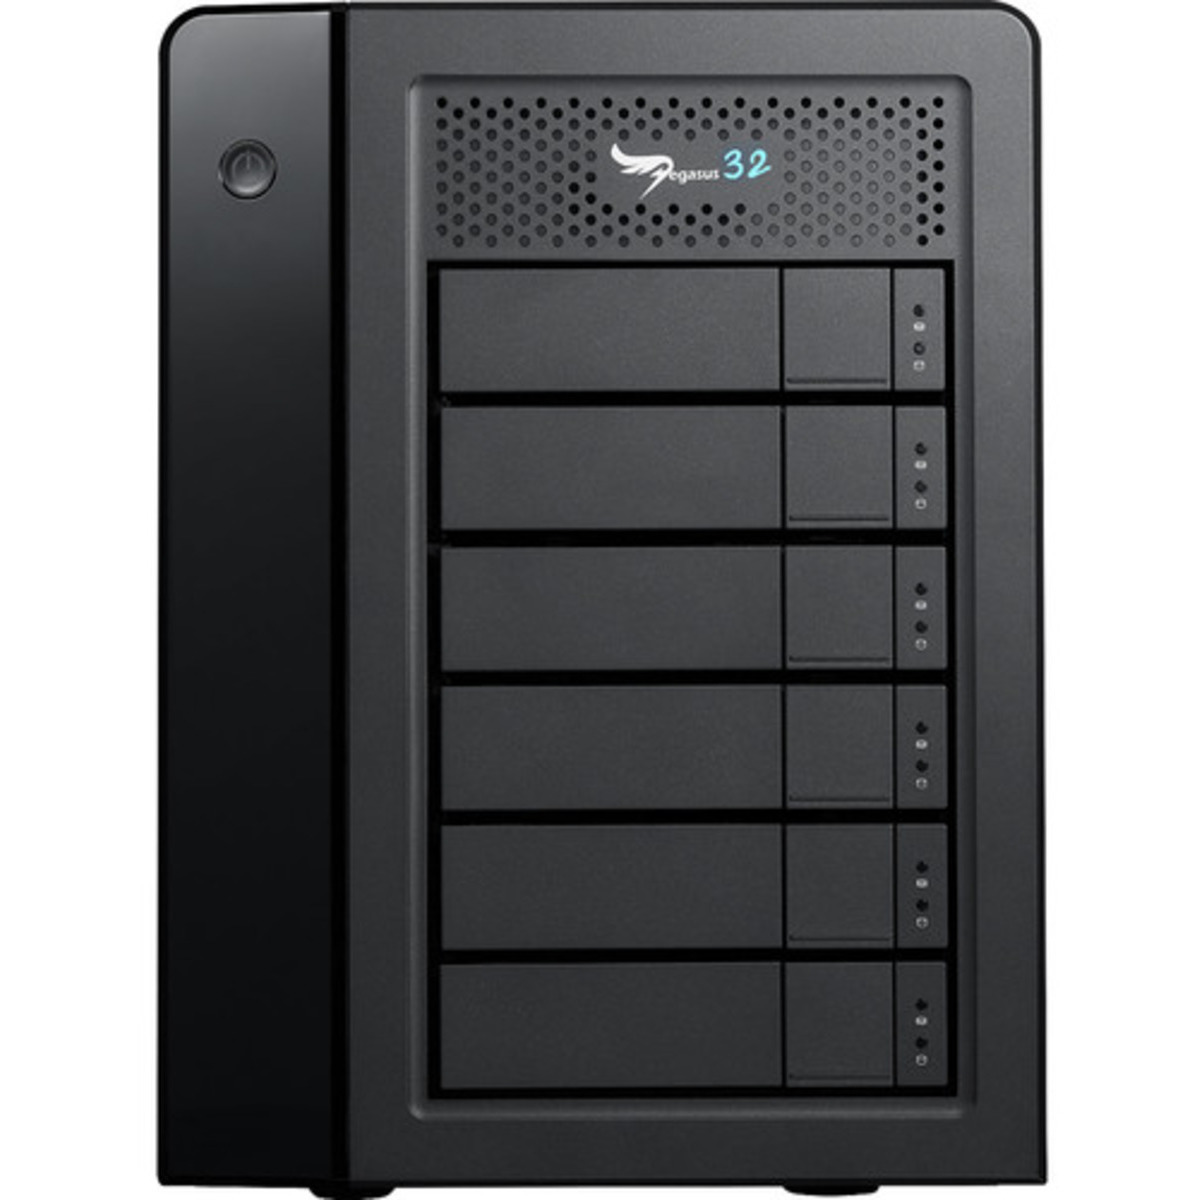 Promise Technology Pegasus32 R6 Thunderbolt 3 6tb 6-Bay Desktop Multimedia / Power User / Business DAS - Direct Attached Storage Device 3x2tb Seagate BarraCuda ST2000DM008 3.5 7200rpm SATA 6Gb/s HDD CONSUMER Class Drives Installed - Burn-In Tested Pegasus32 R6 Thunderbolt 3